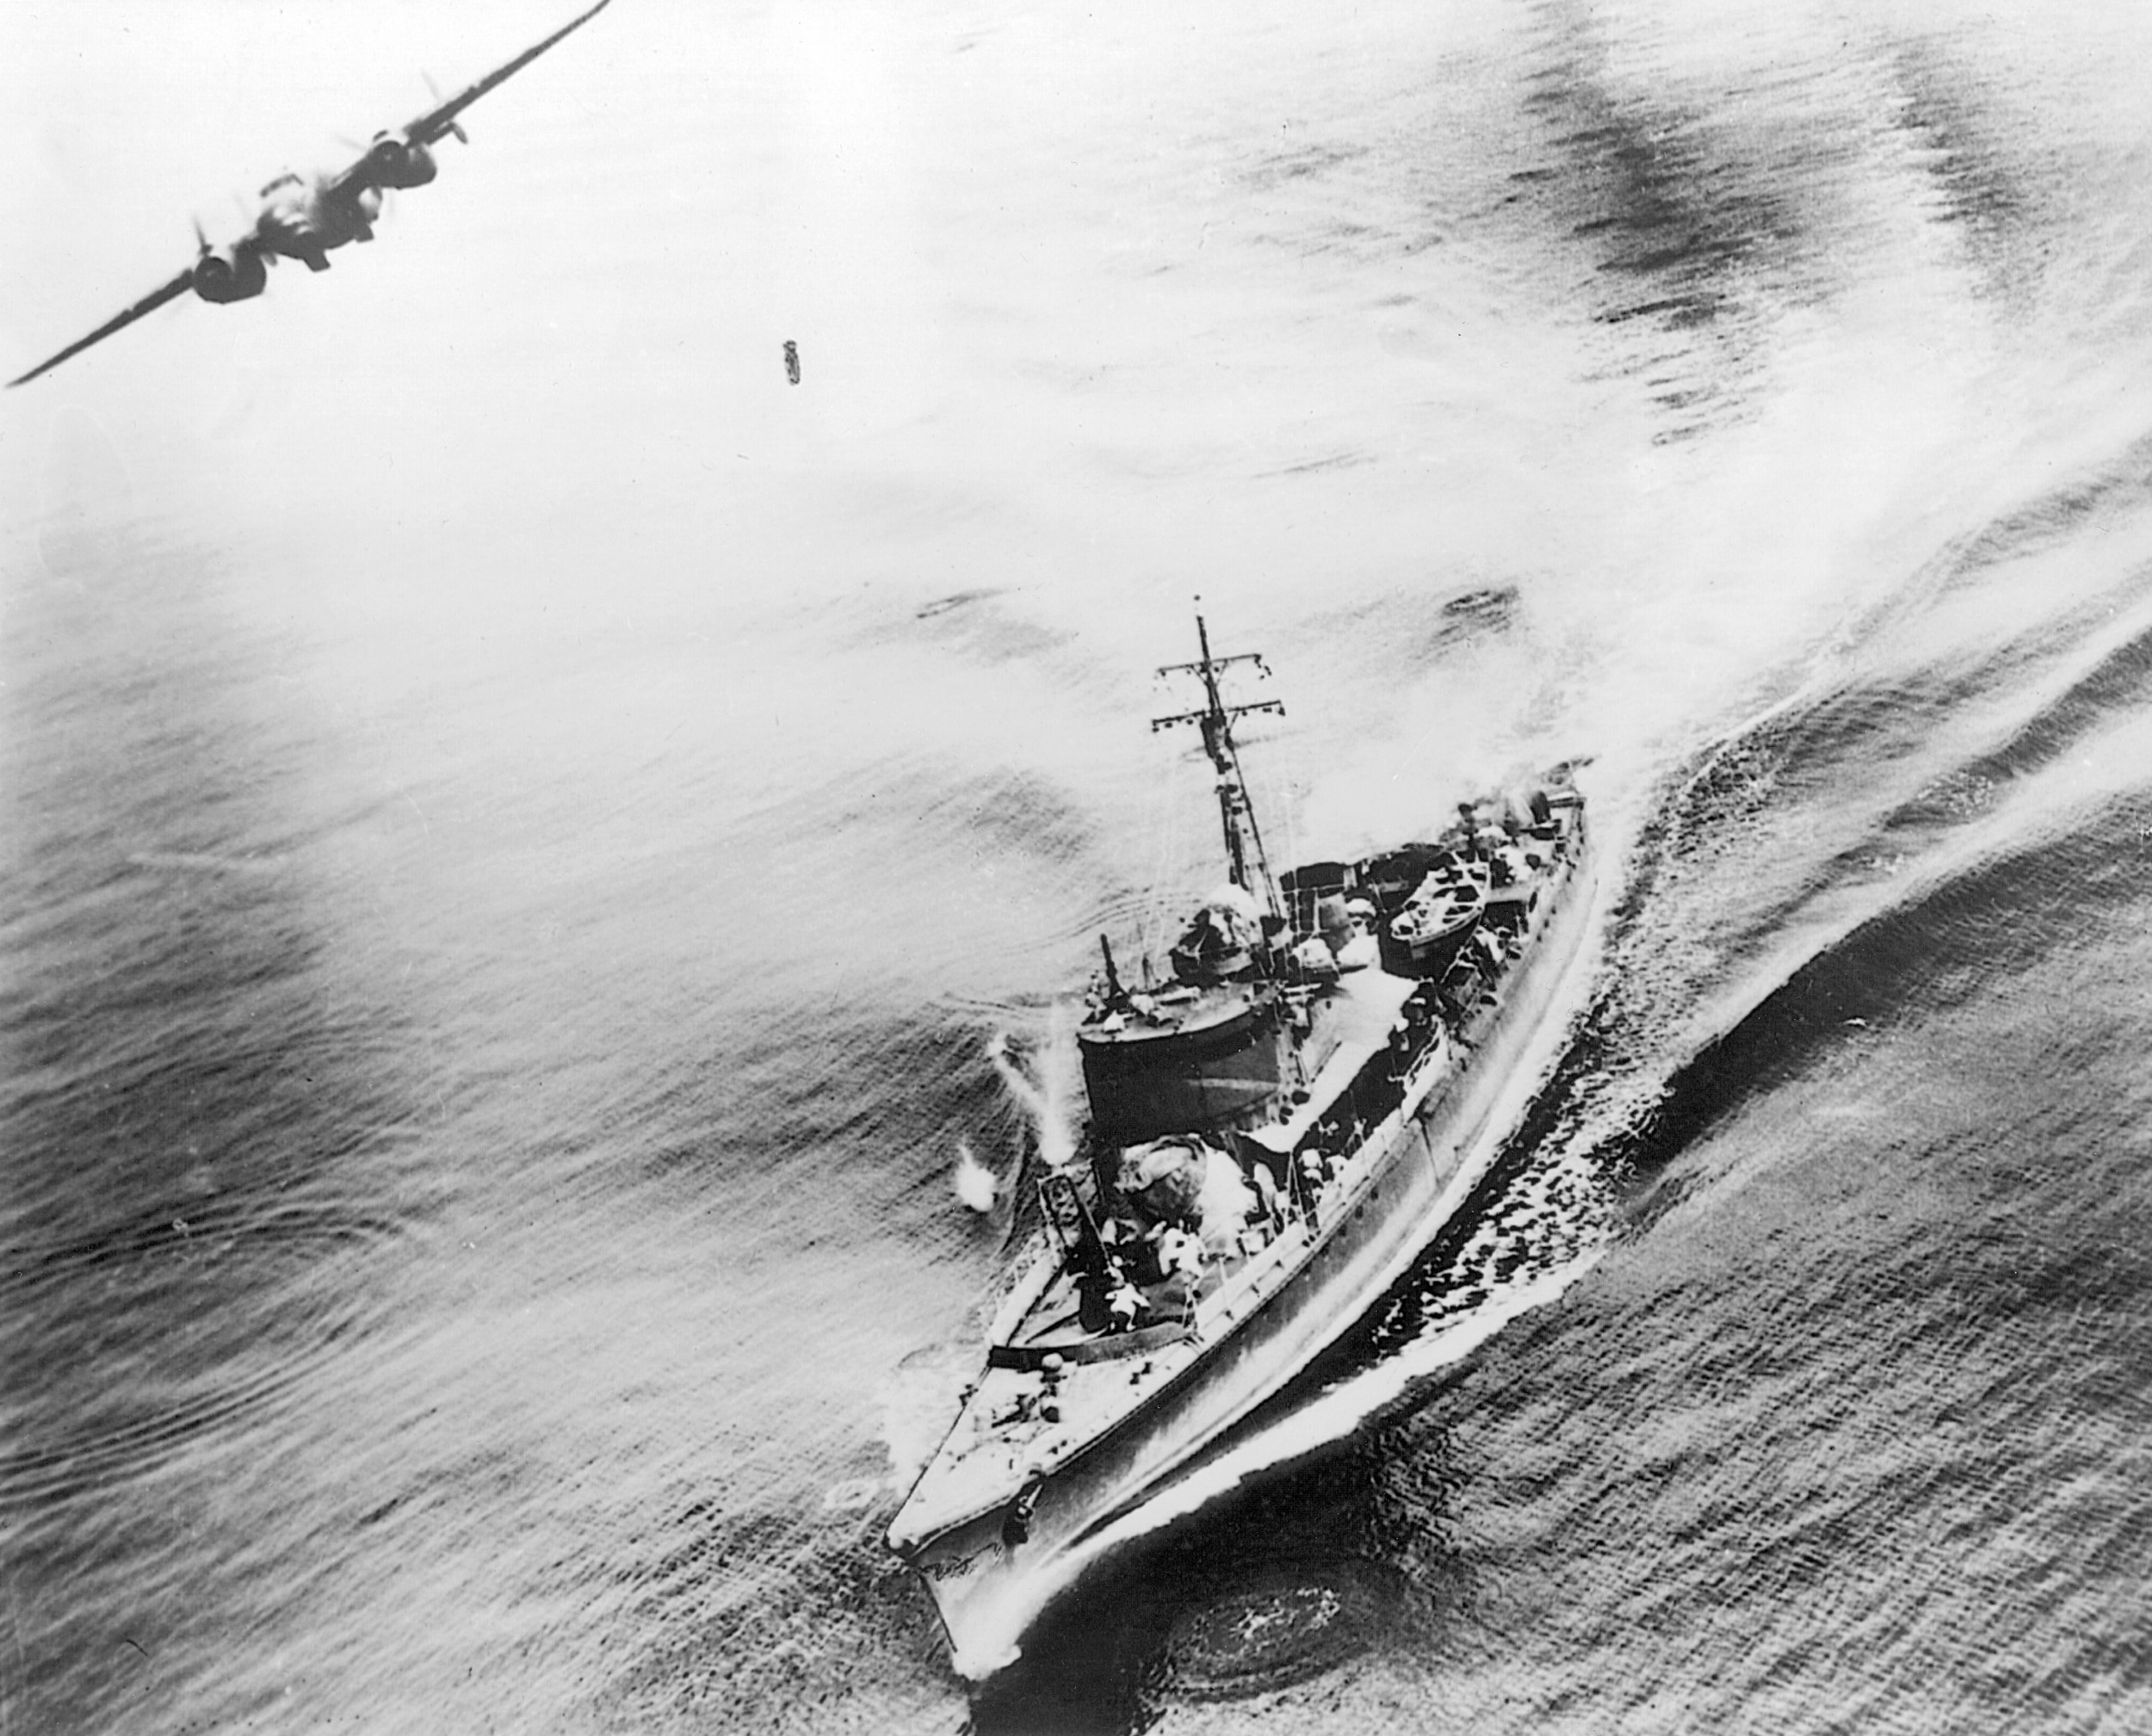 An American bomber banks away from a Japanese warship in the Bismarck Sea. Its bomb can be seen plummeting toward the pagoda-masted target below. 